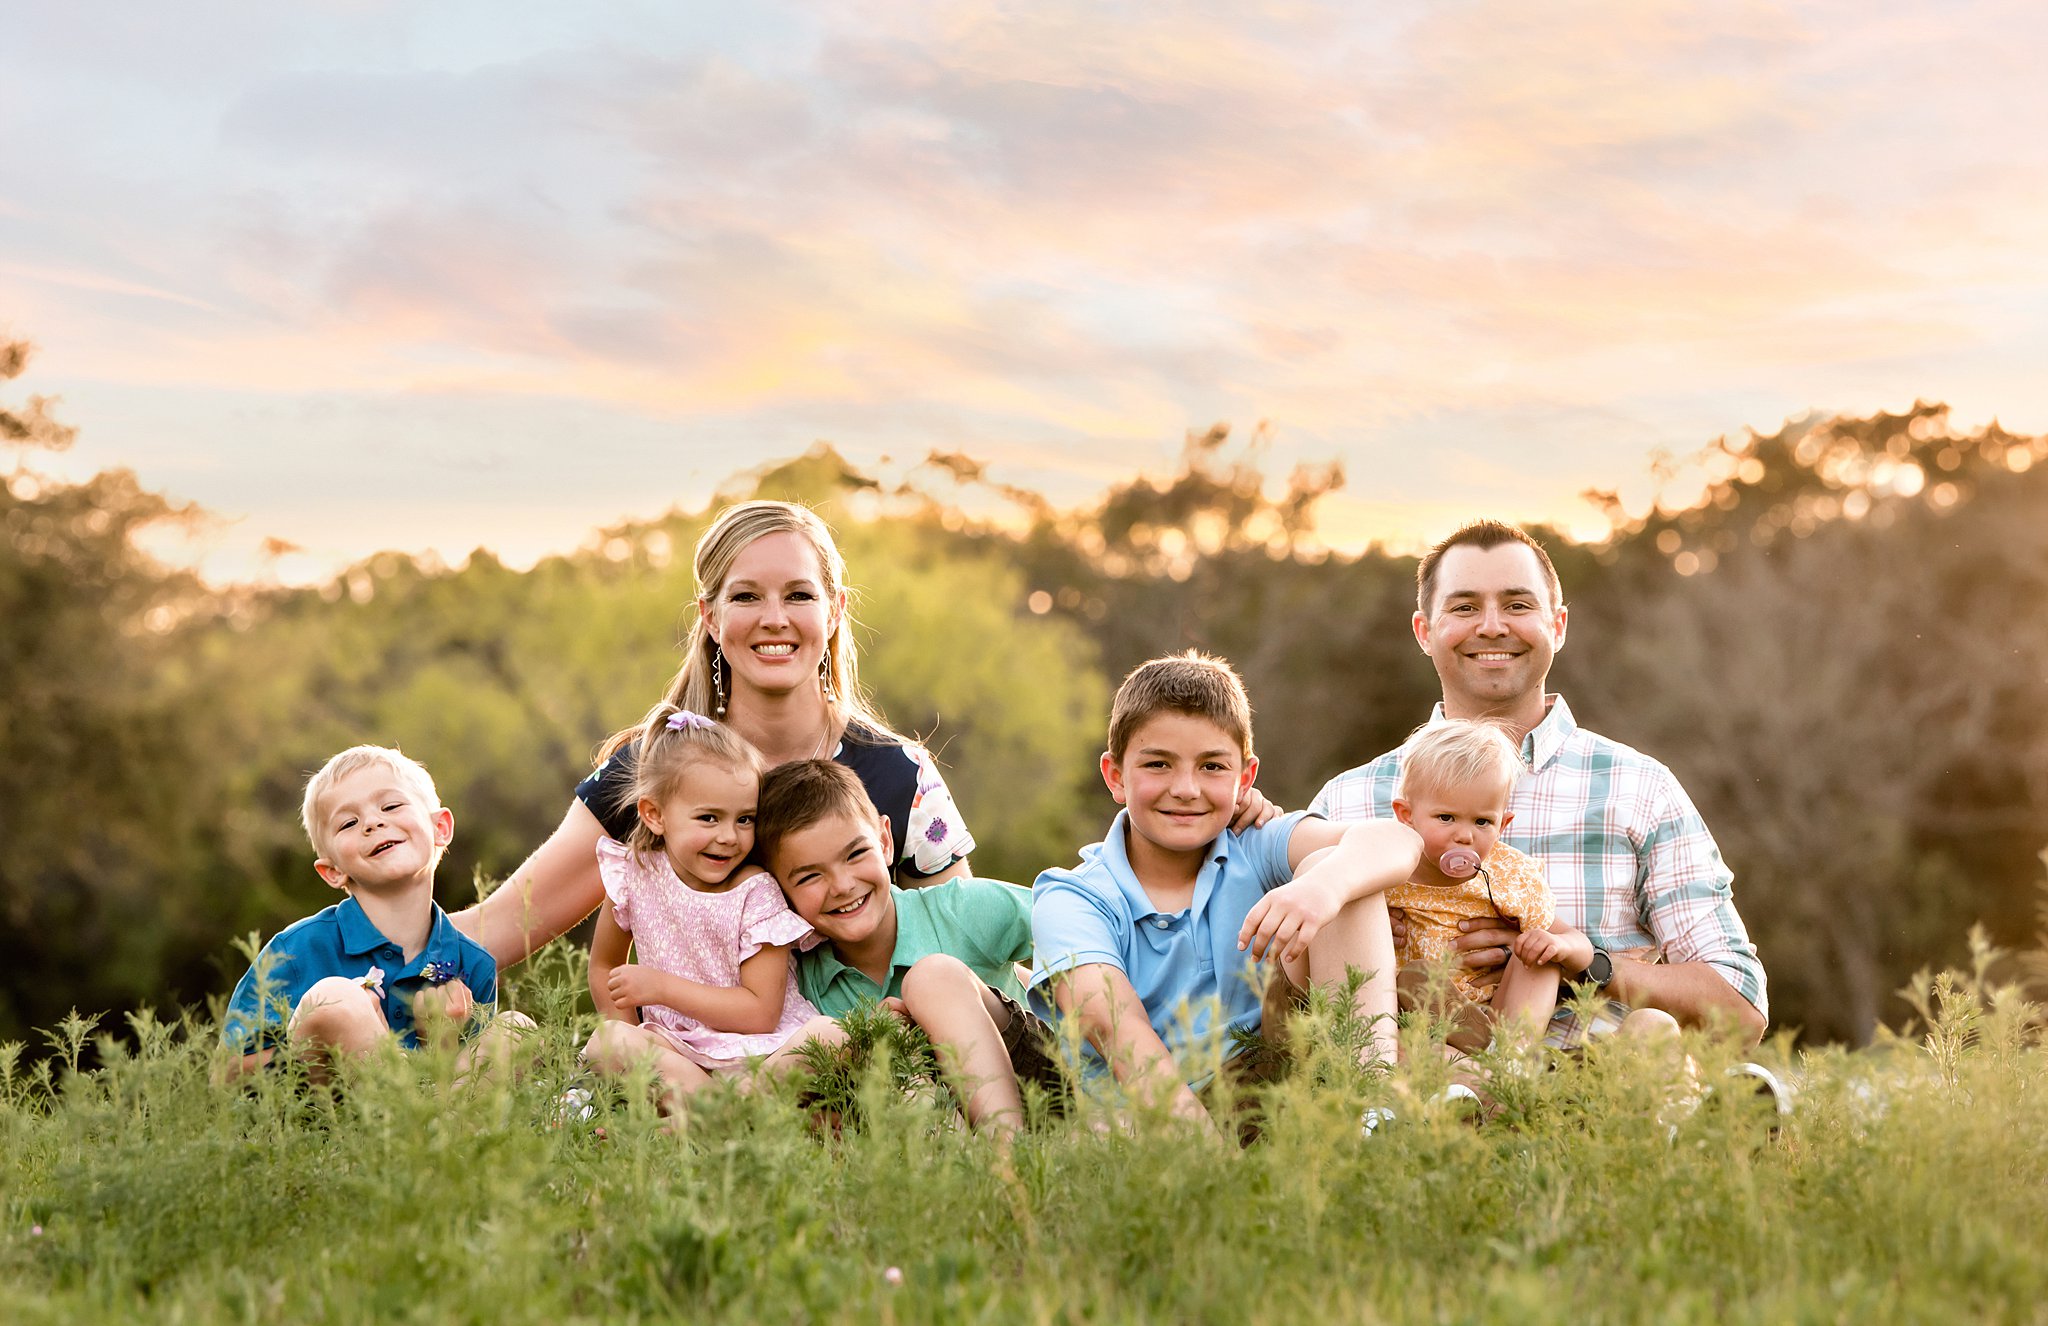 family of seven sits together in a field of green grass at sunset